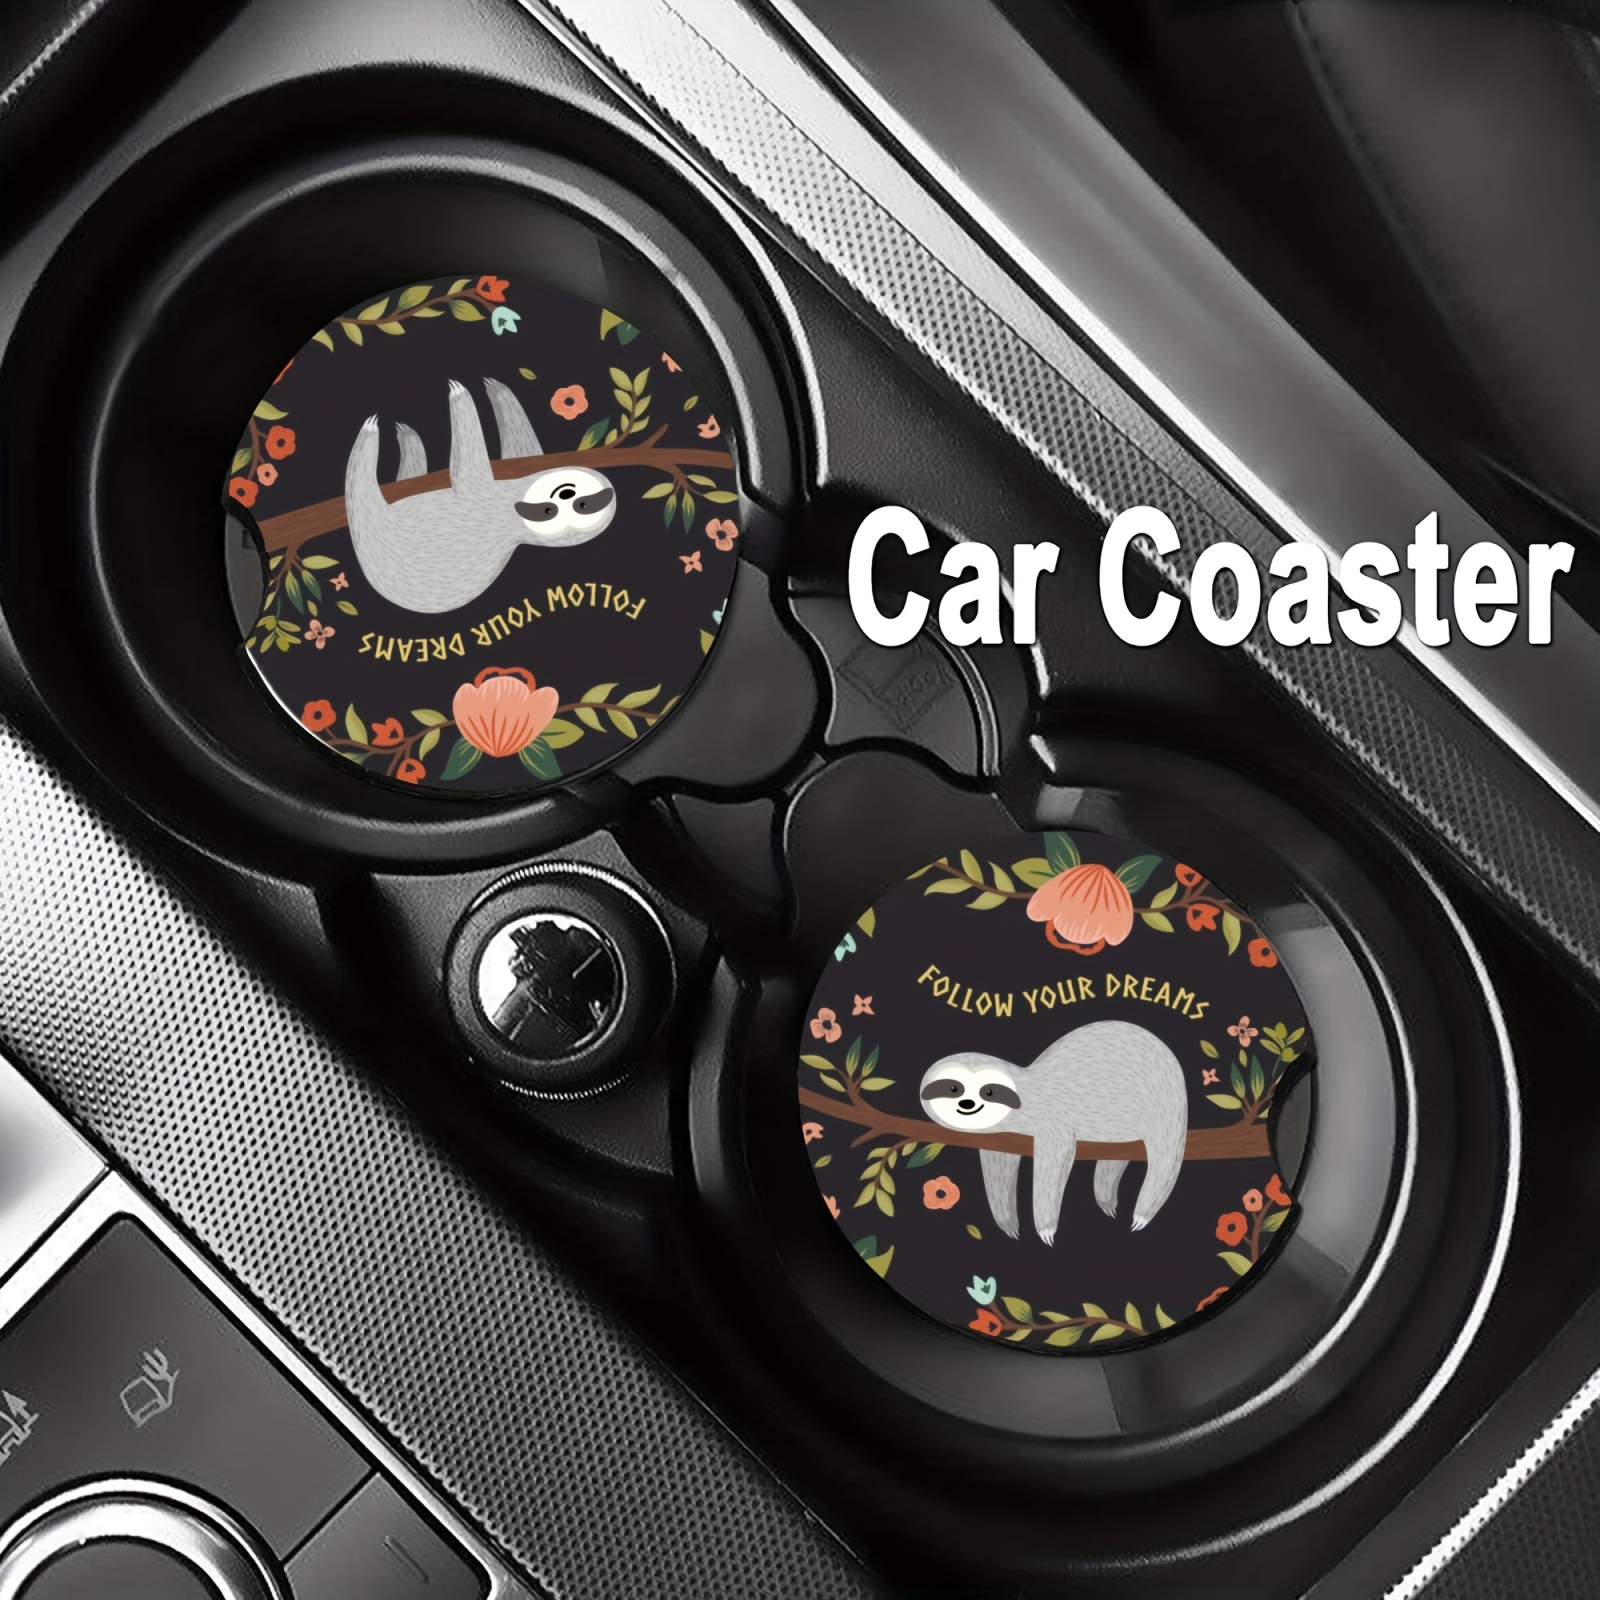 Car Cup Holder Coasters for Mickey Mouse, 2PCS 2.75 Disney Car Coasters  for Mickey Mouse Car Cup Holder Insert Coasters Car Decoration Gifts by